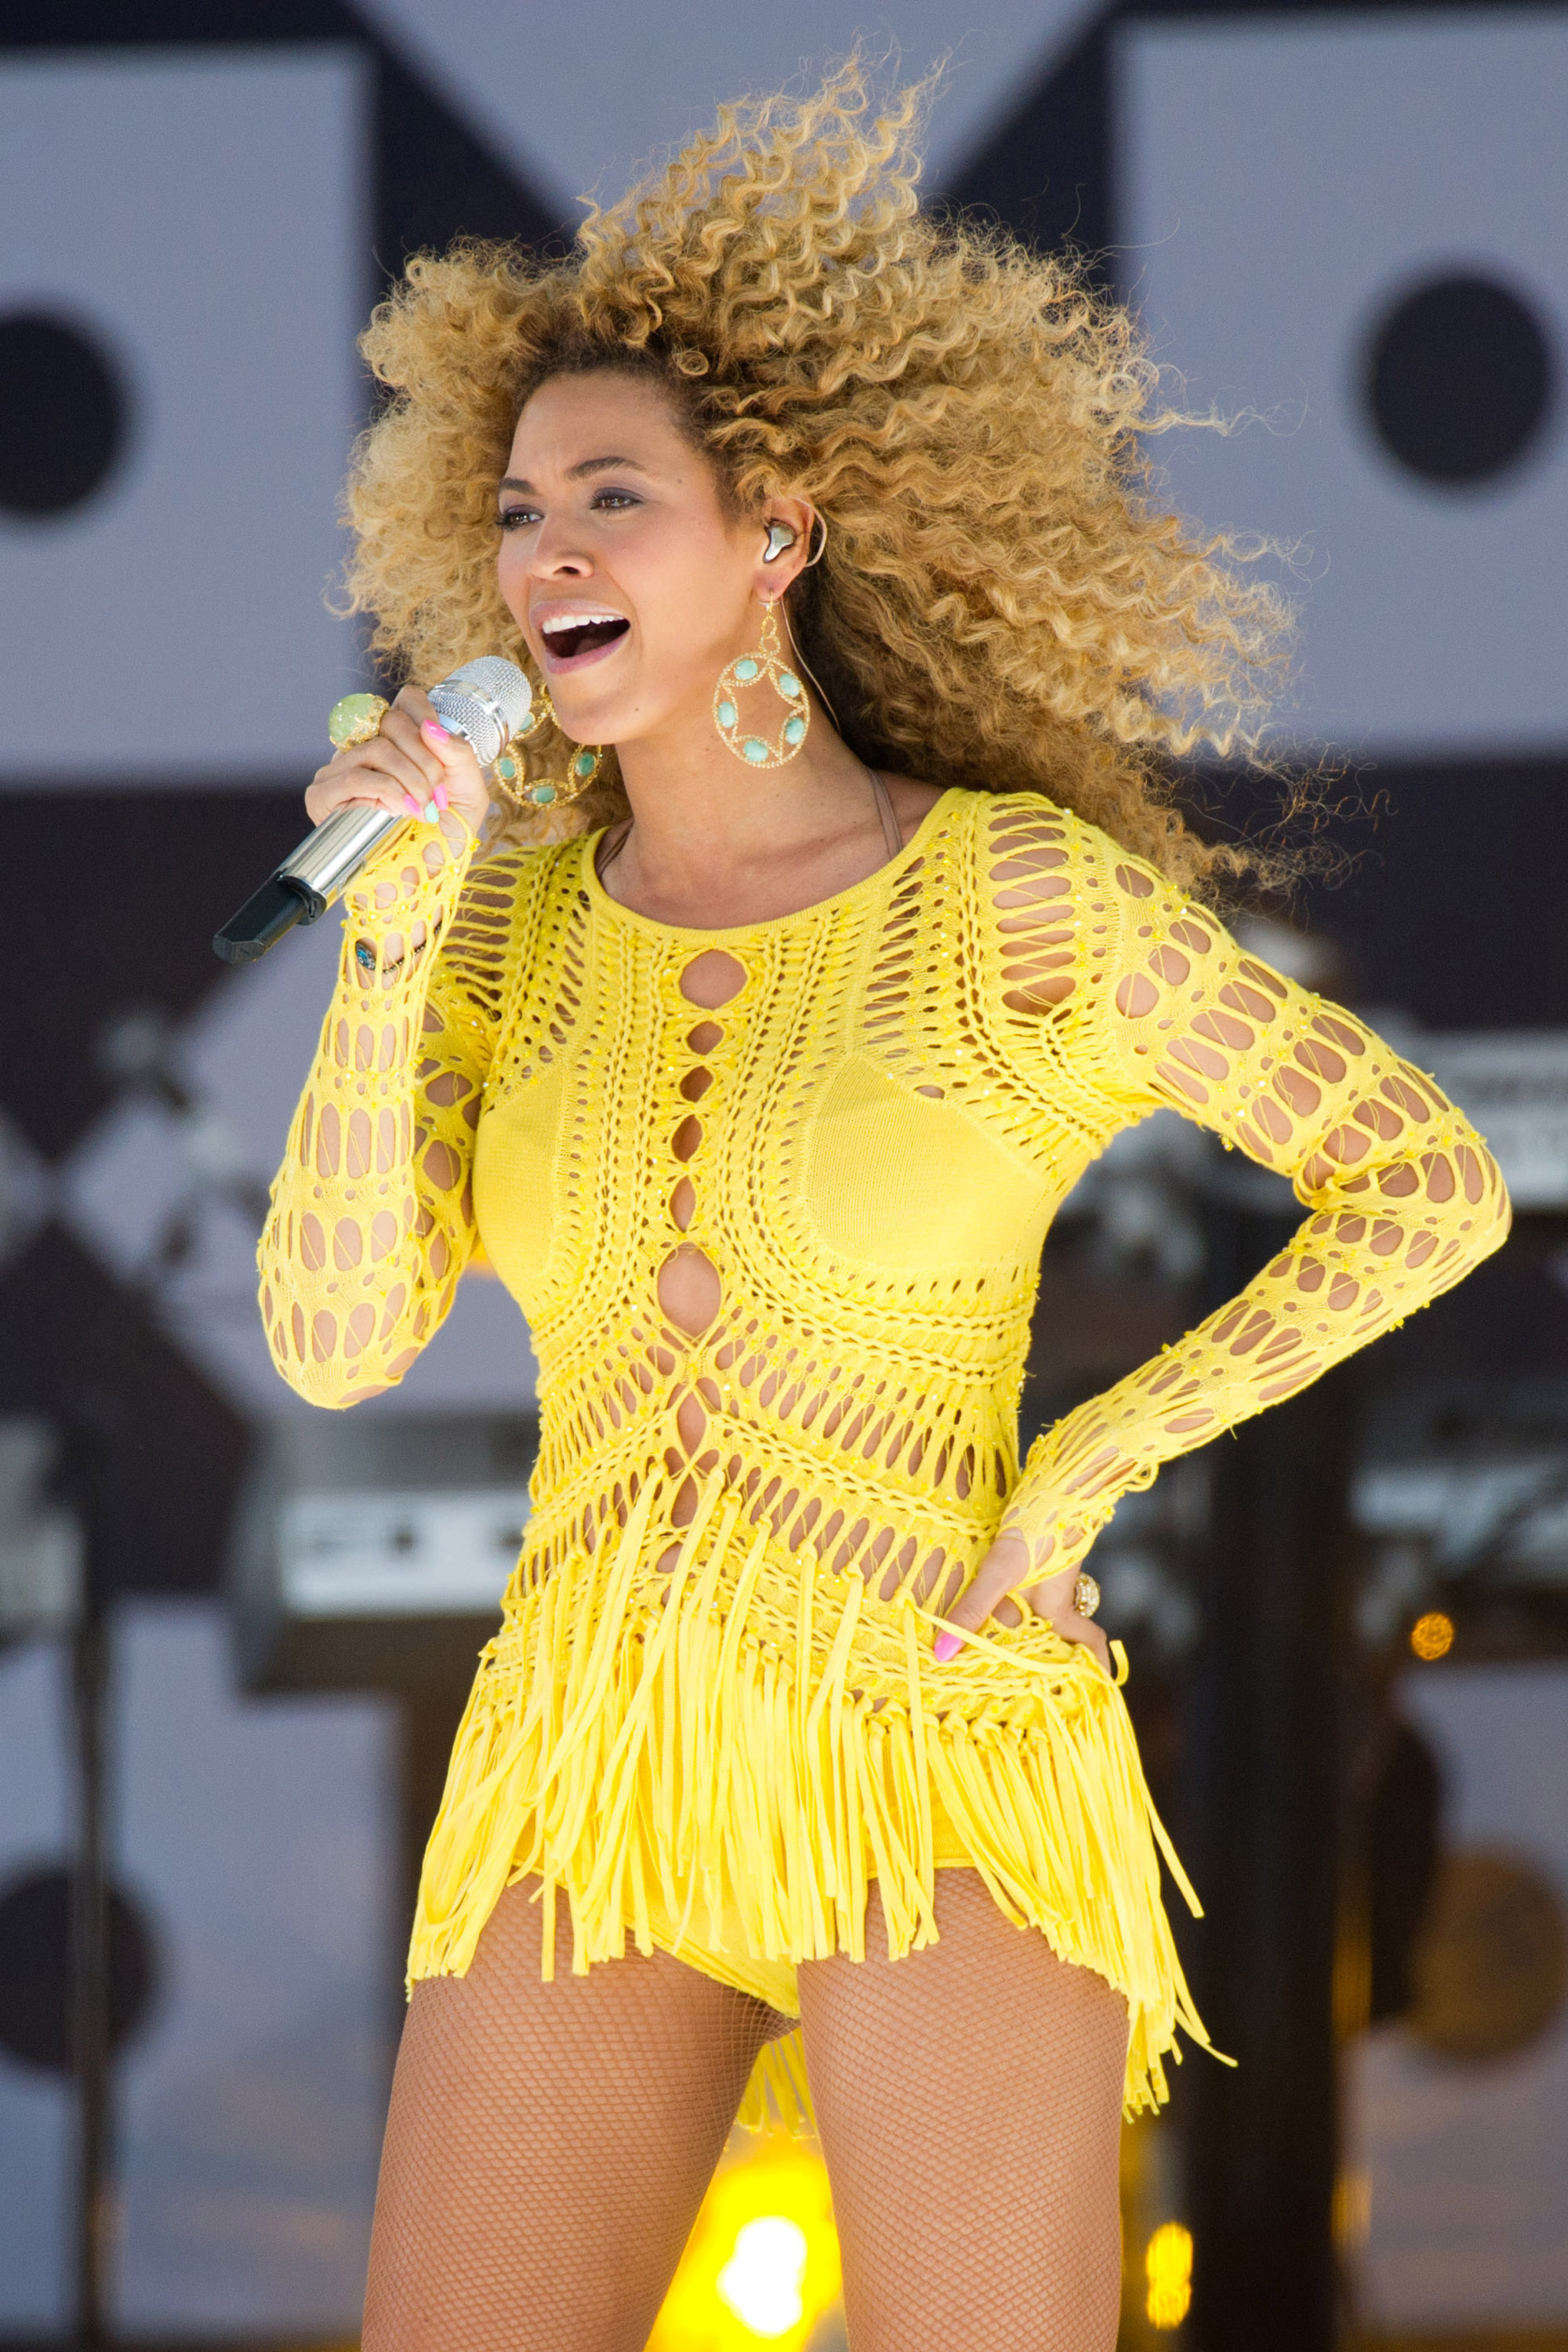 Beyonce documentary to debut Feb. 16 - The Blade